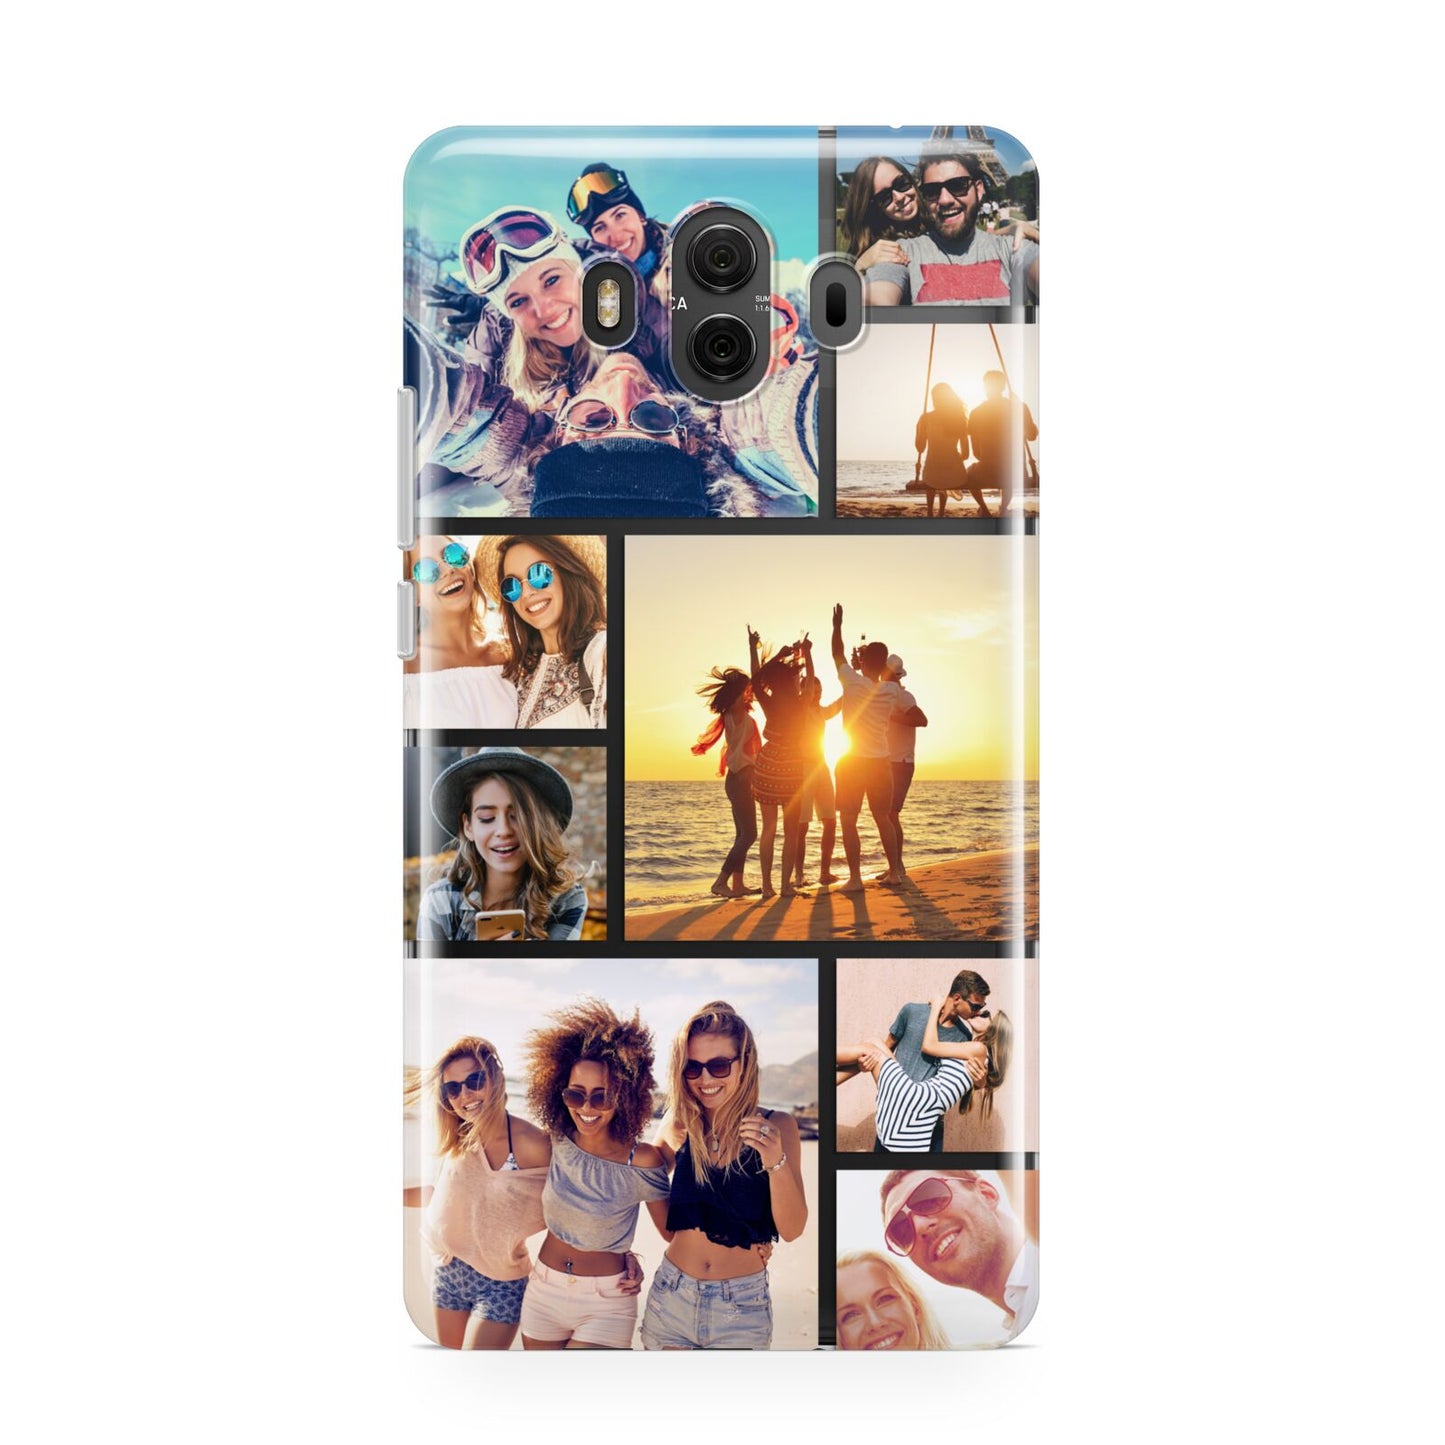 Abstract Photo Collage Upload Huawei Mate 10 Protective Phone Case